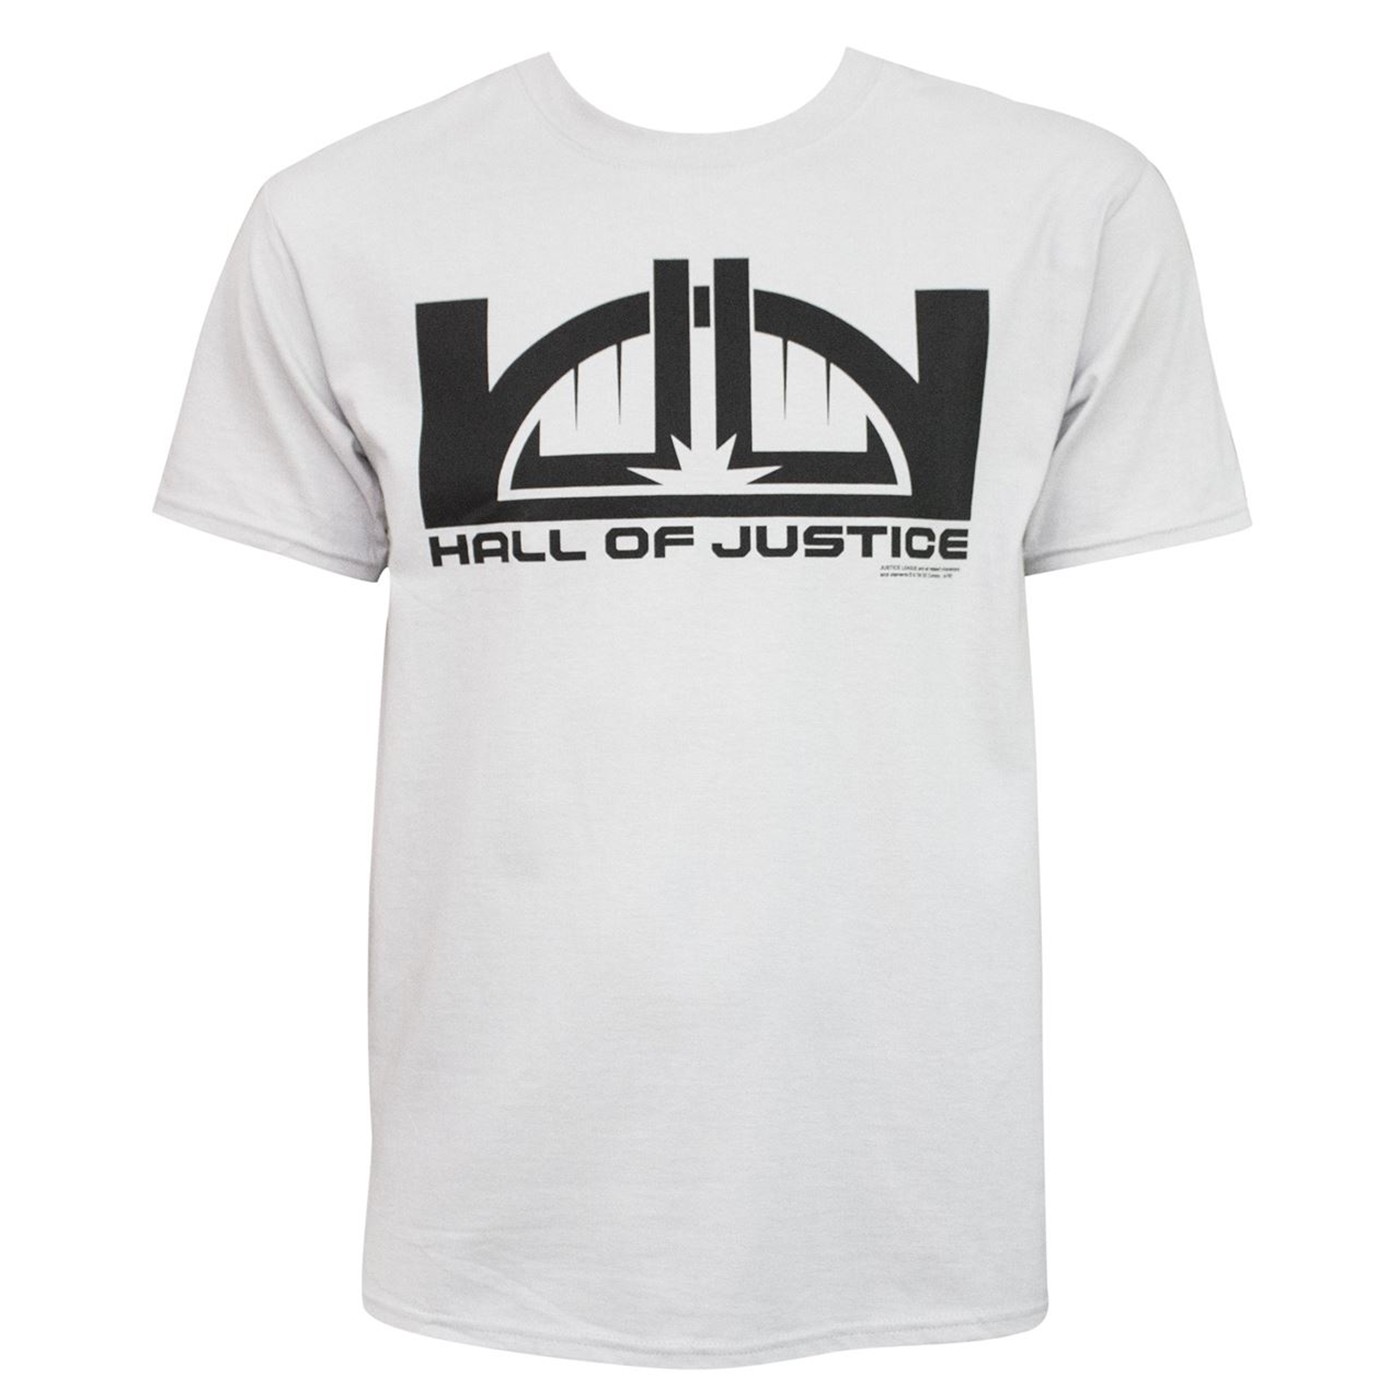 Hall of Justice T-Shirt